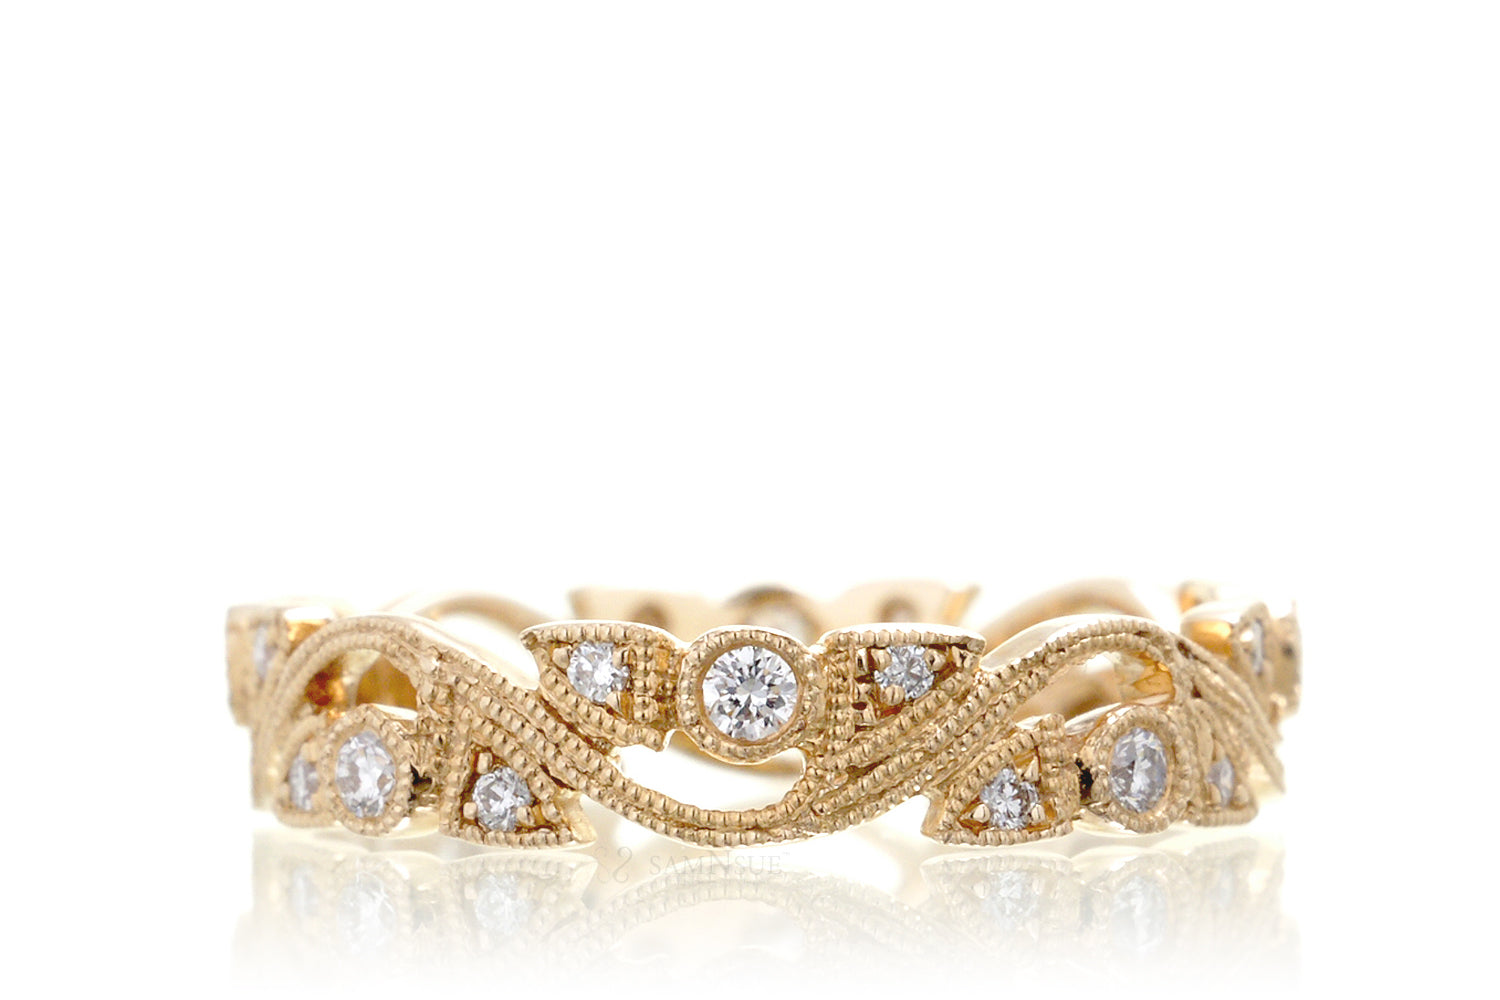 The Leaf And Vine Eternity Band